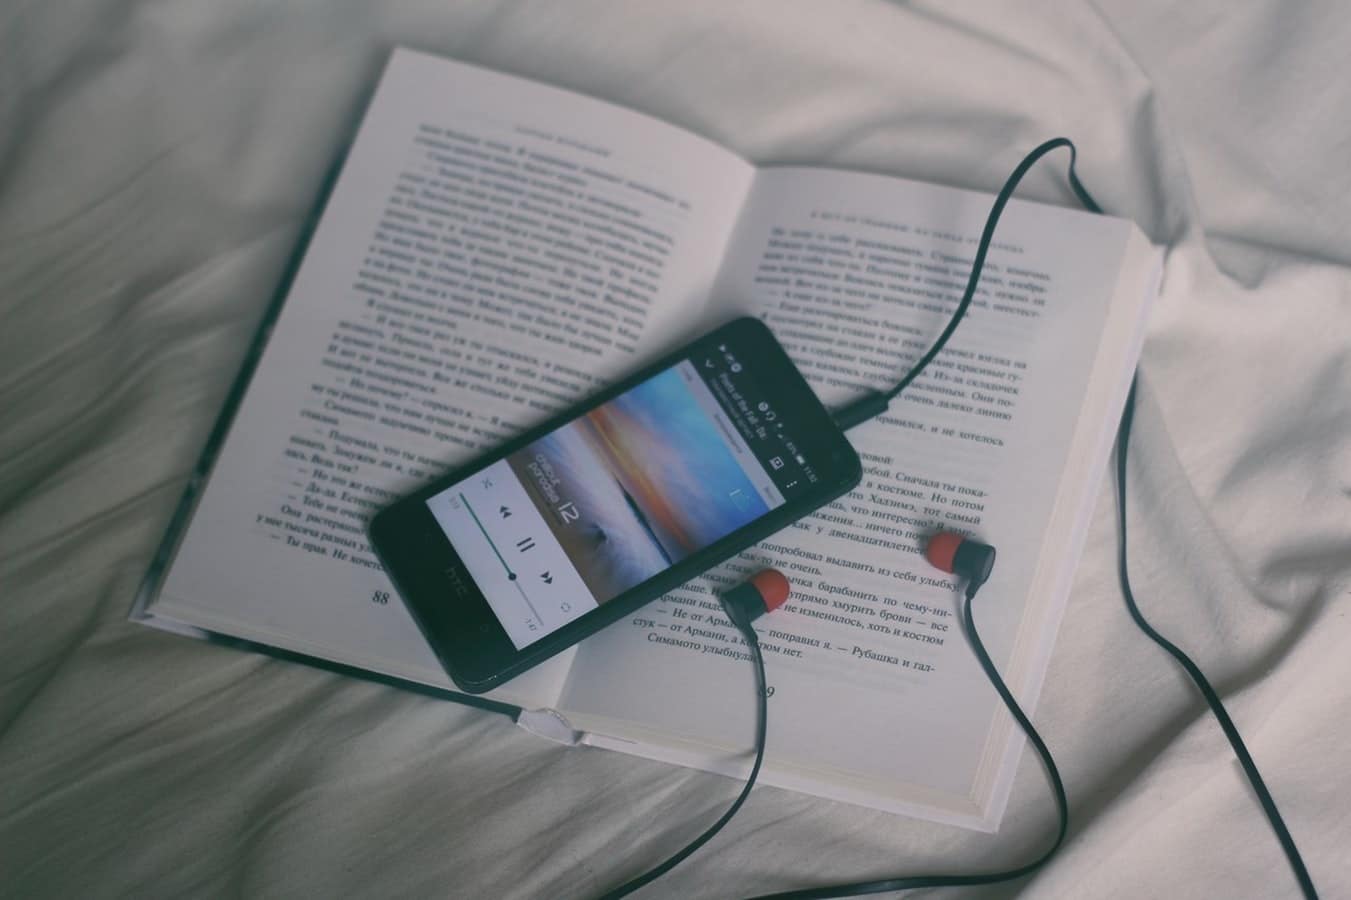 Smart phone playing music, with headphones plugged in, wrapped around a book